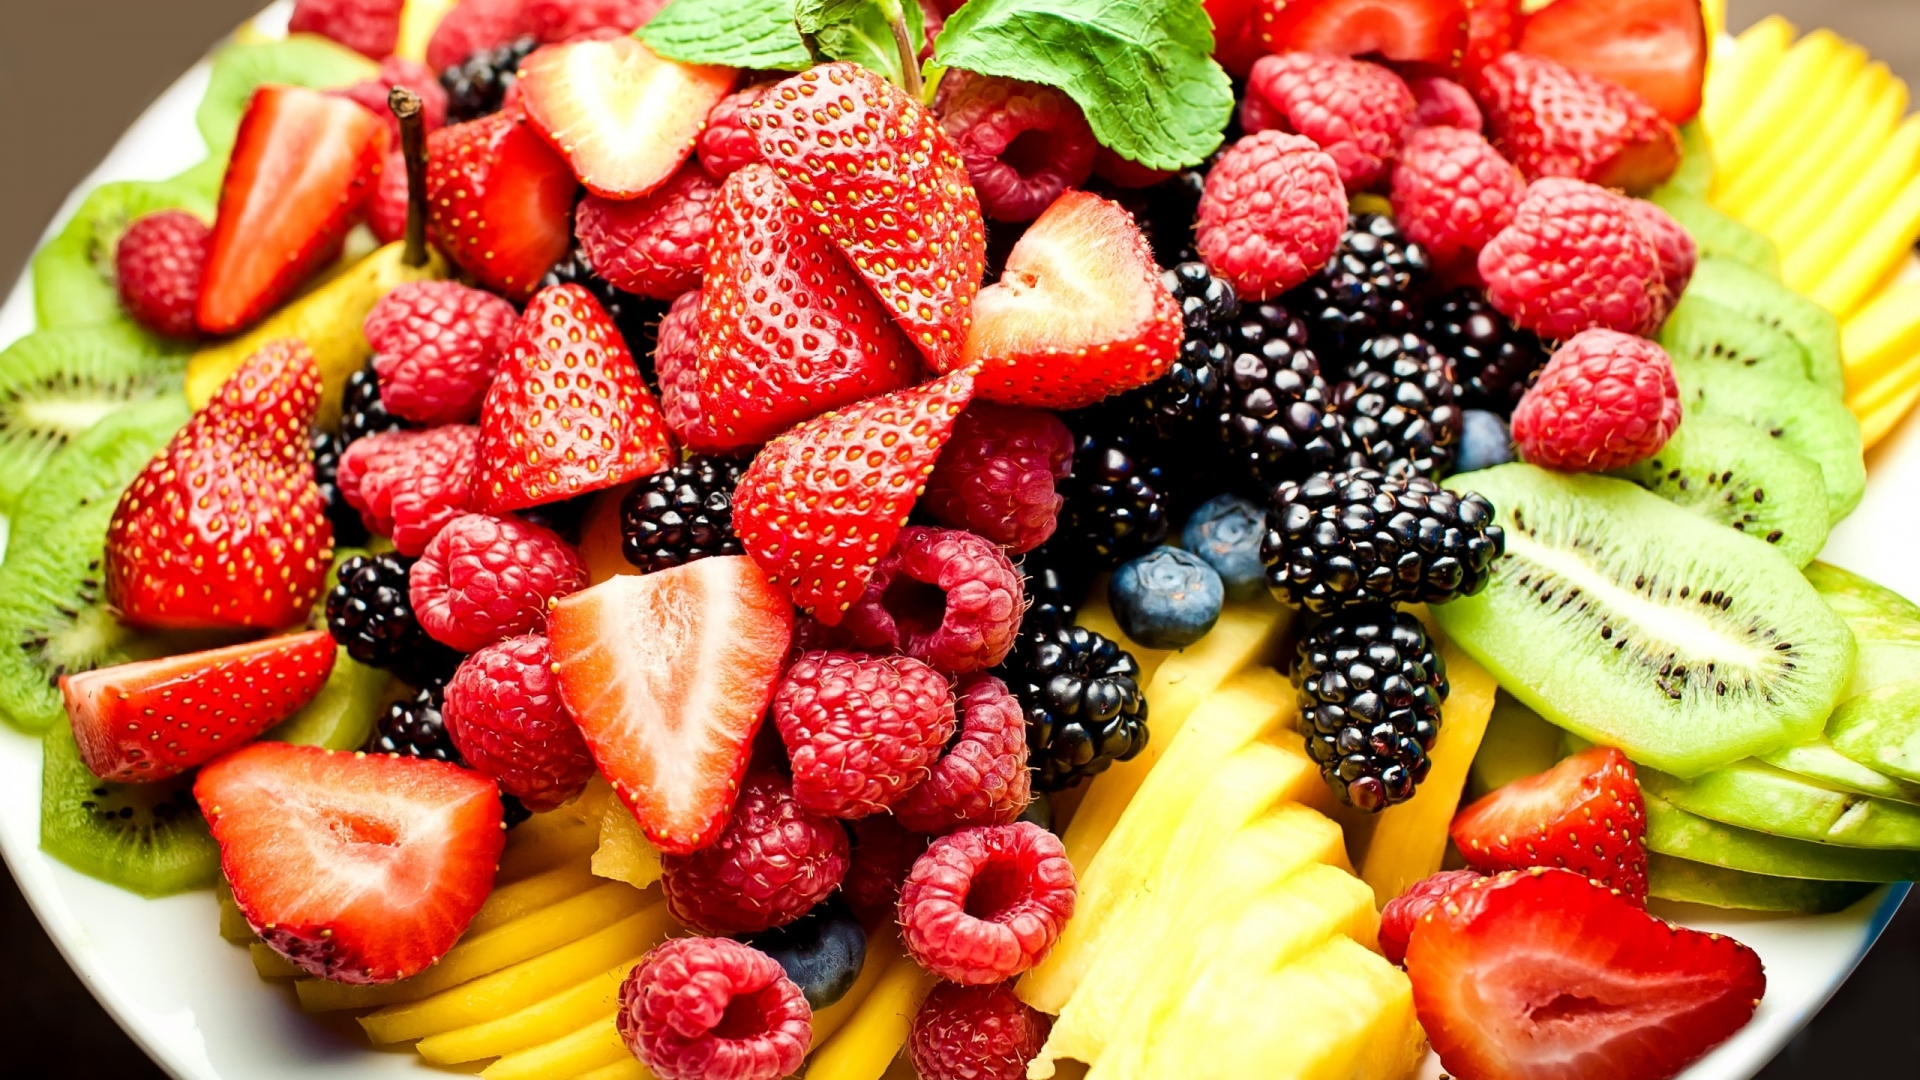 Fruits Plate for 1920 x 1080 HDTV 1080p resolution